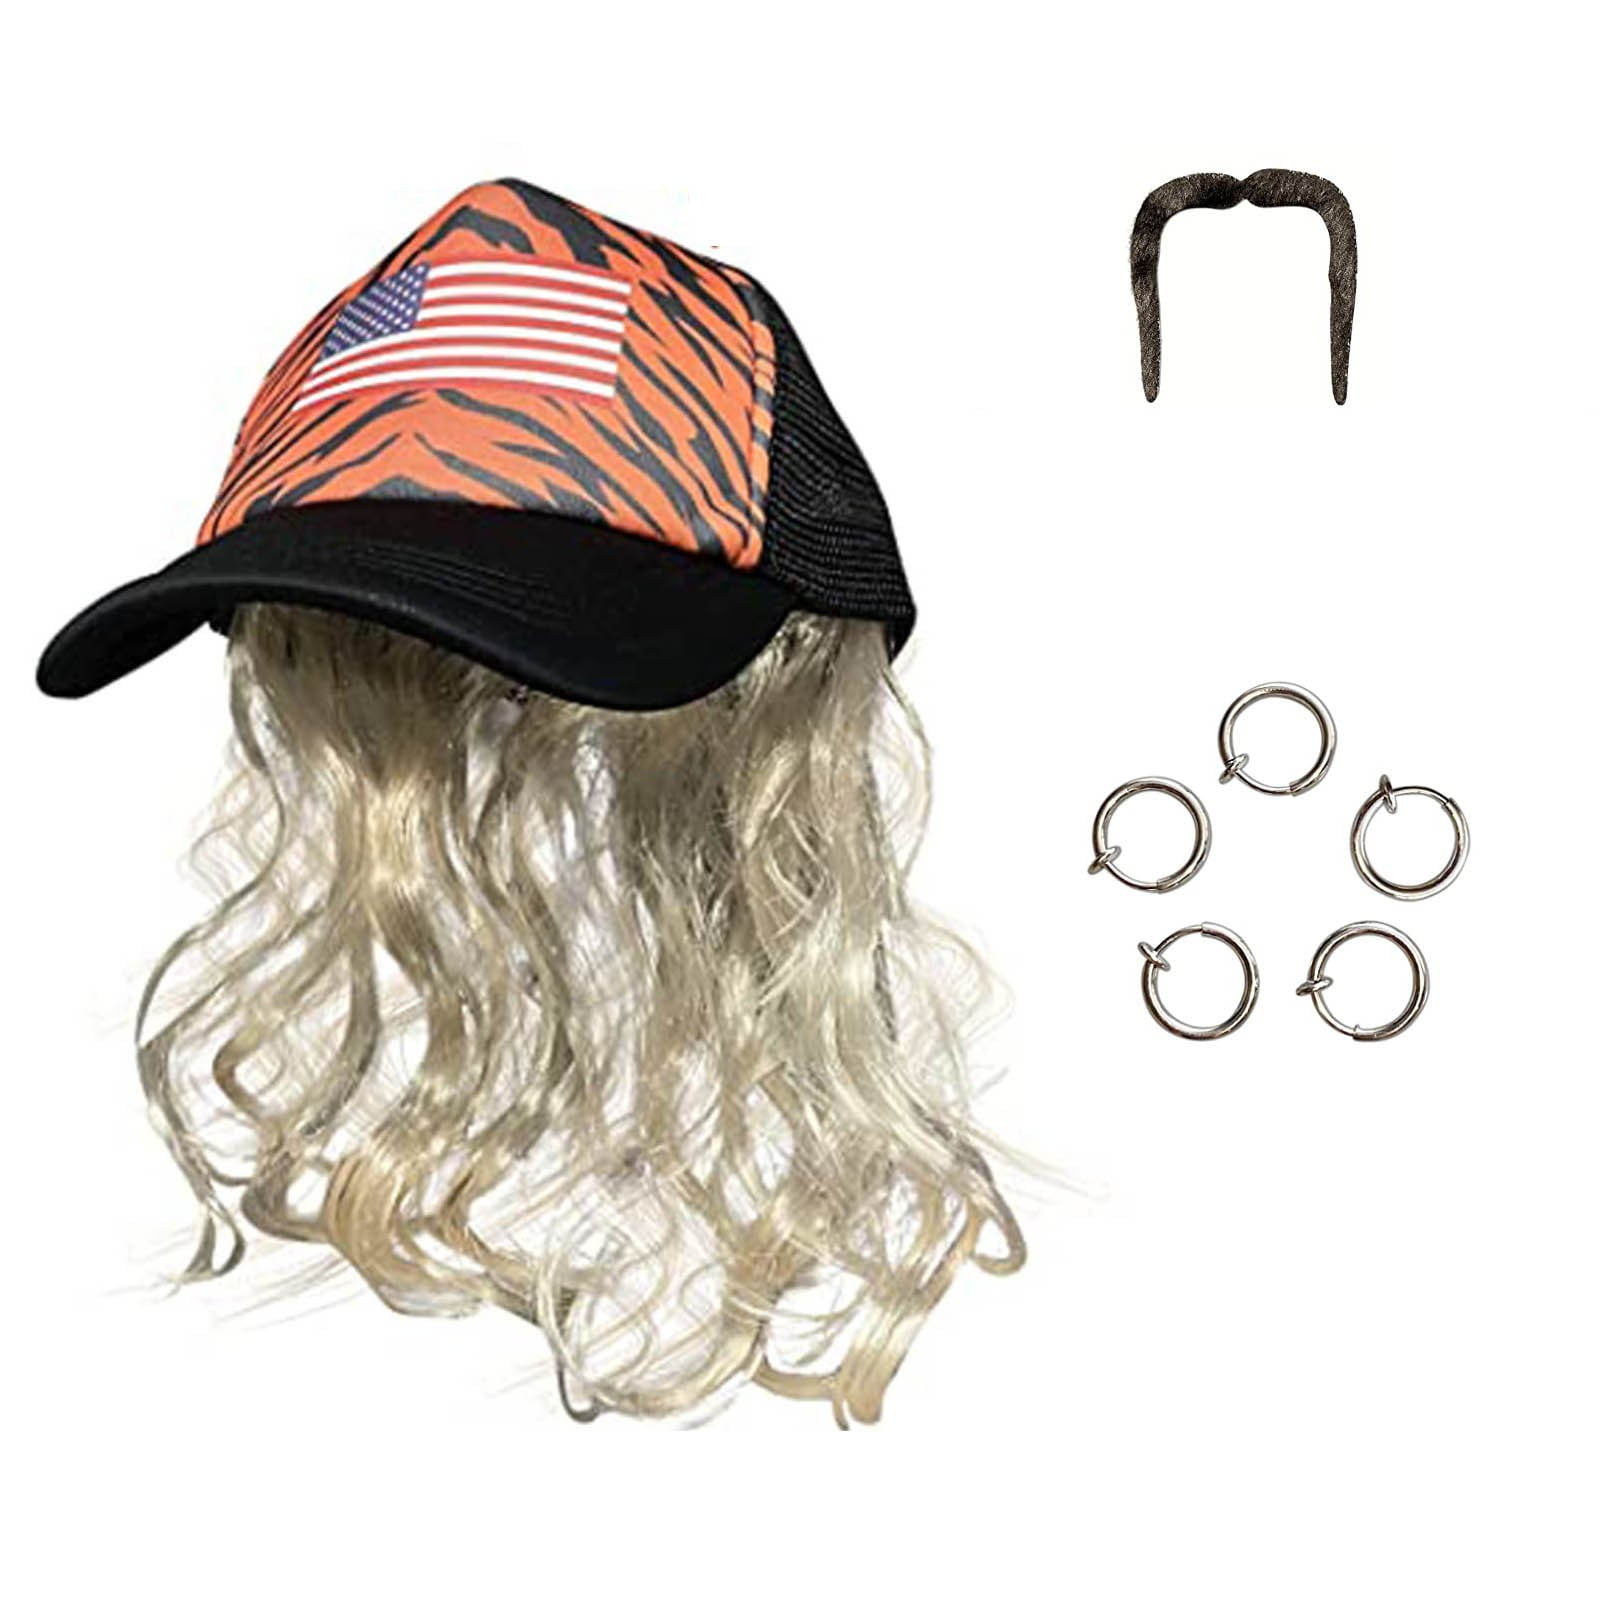 Baseball Cap With Hair Extensions Adjustable Hair Hats Kinky Baseball Low L With Attached Wig Women Wave Baseball Cap Hairpiece Fedora Hat Hat Synthetic Profile A Curly Hair Wig With - For